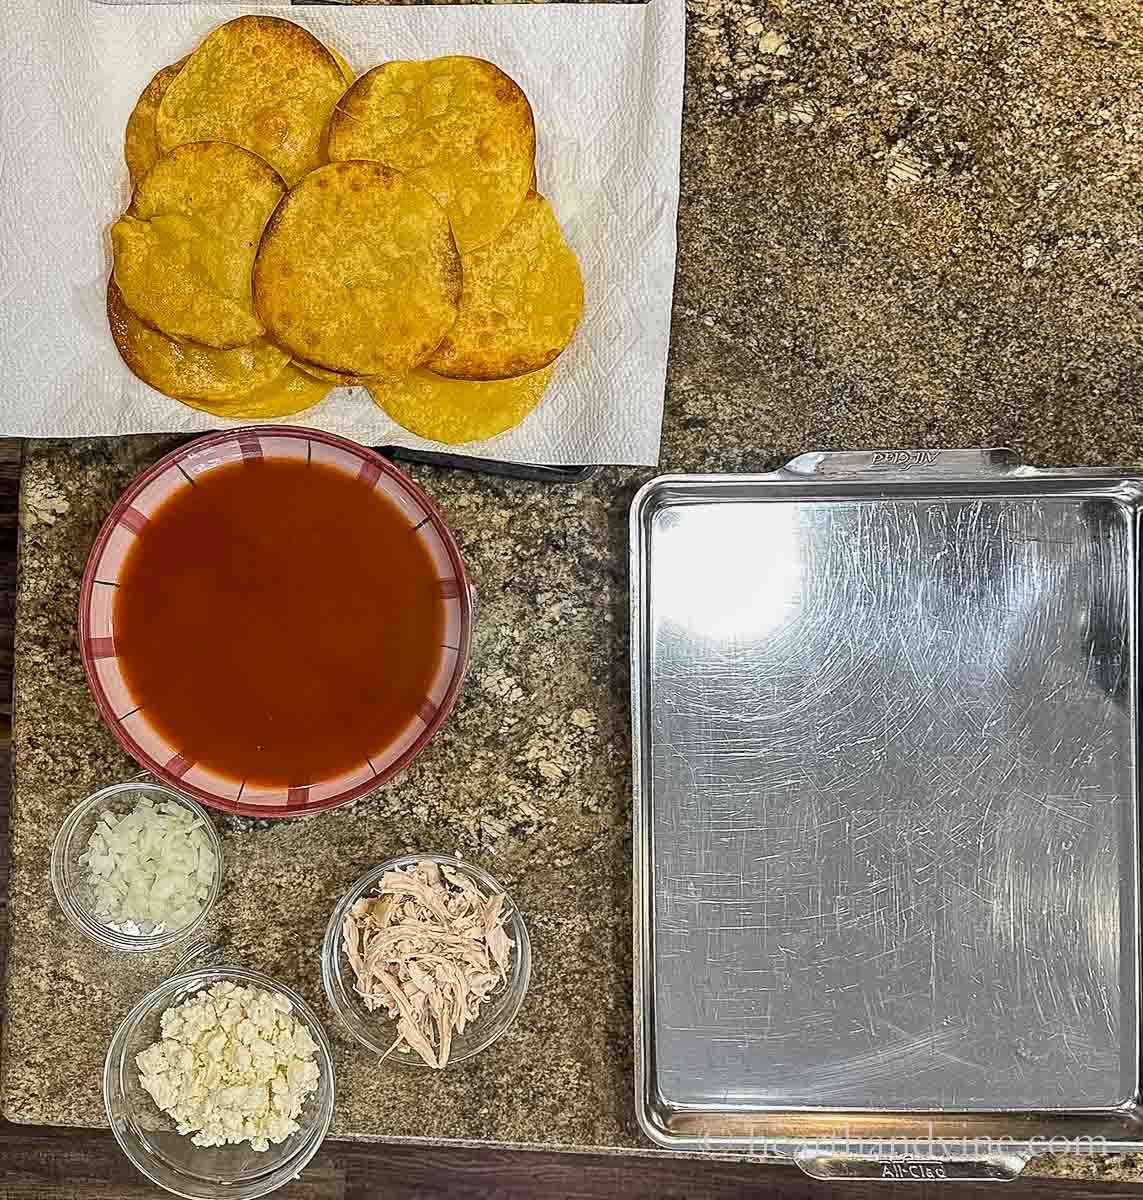 Fried corn tortillas, a bowl of red enchilada sauce, bowls of chopped onions, queso fresco and shredded chicken.